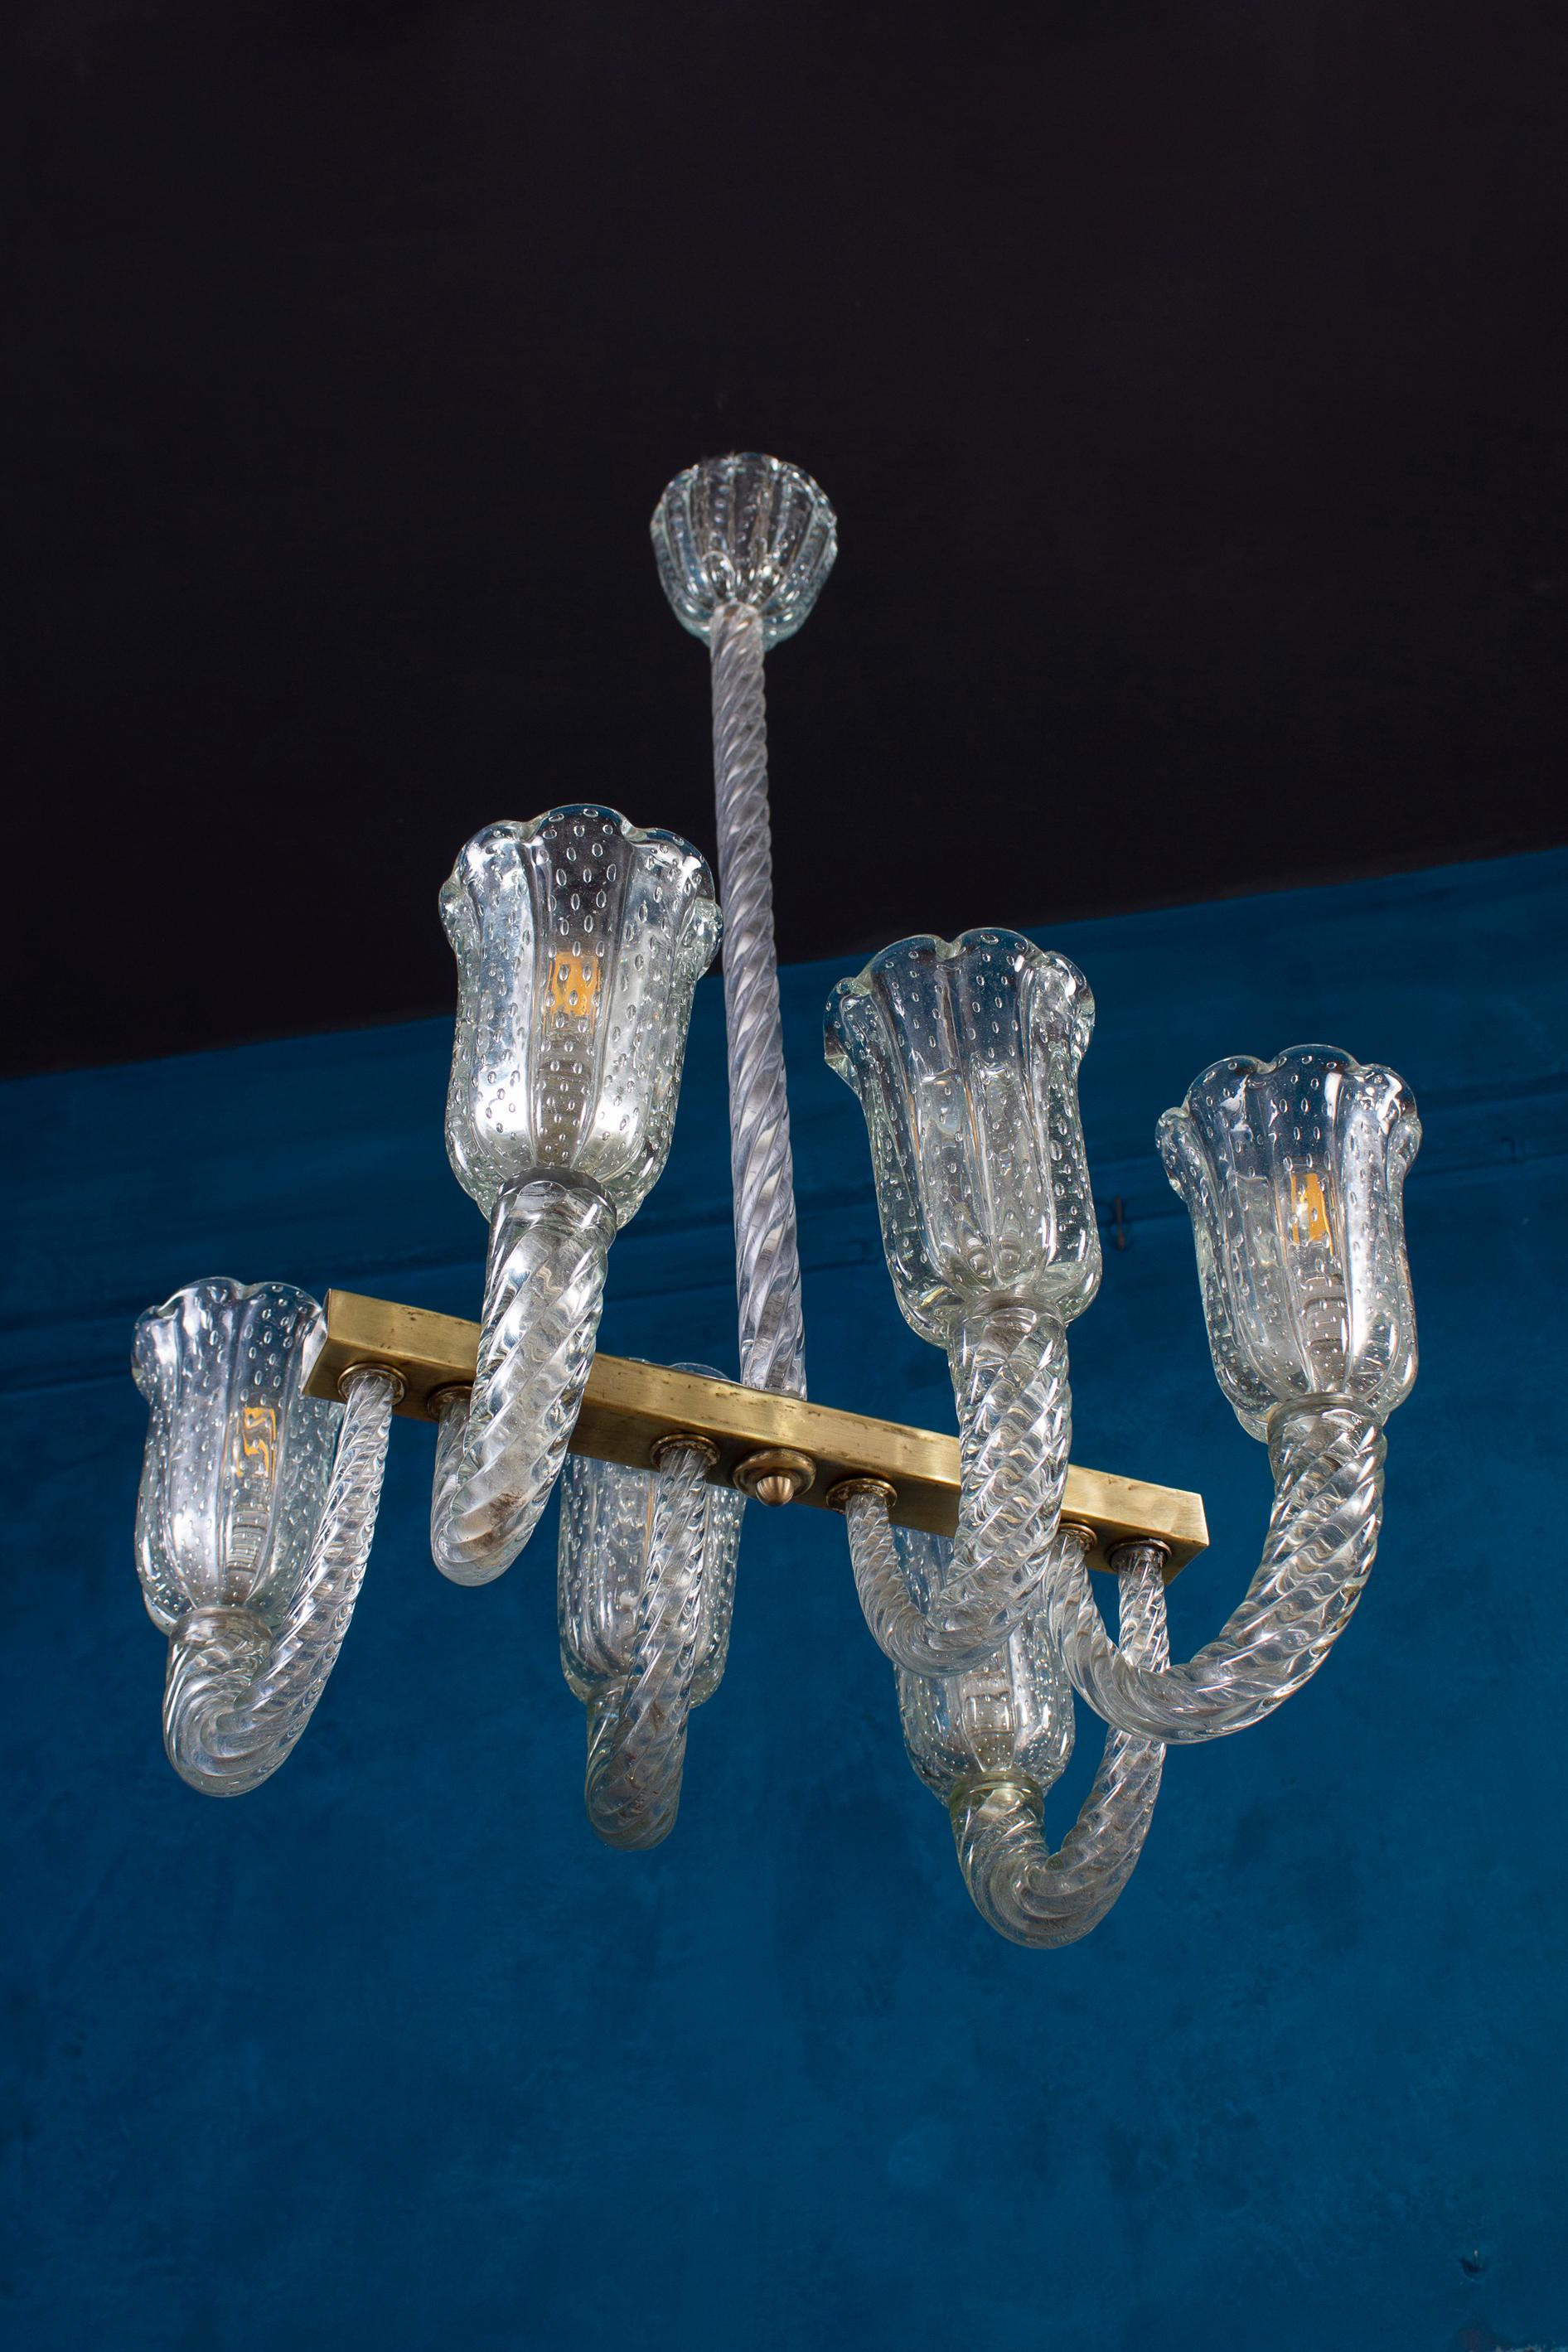 Italian Imposing Art Deco Chandelier by Barovier & Toso For Sale